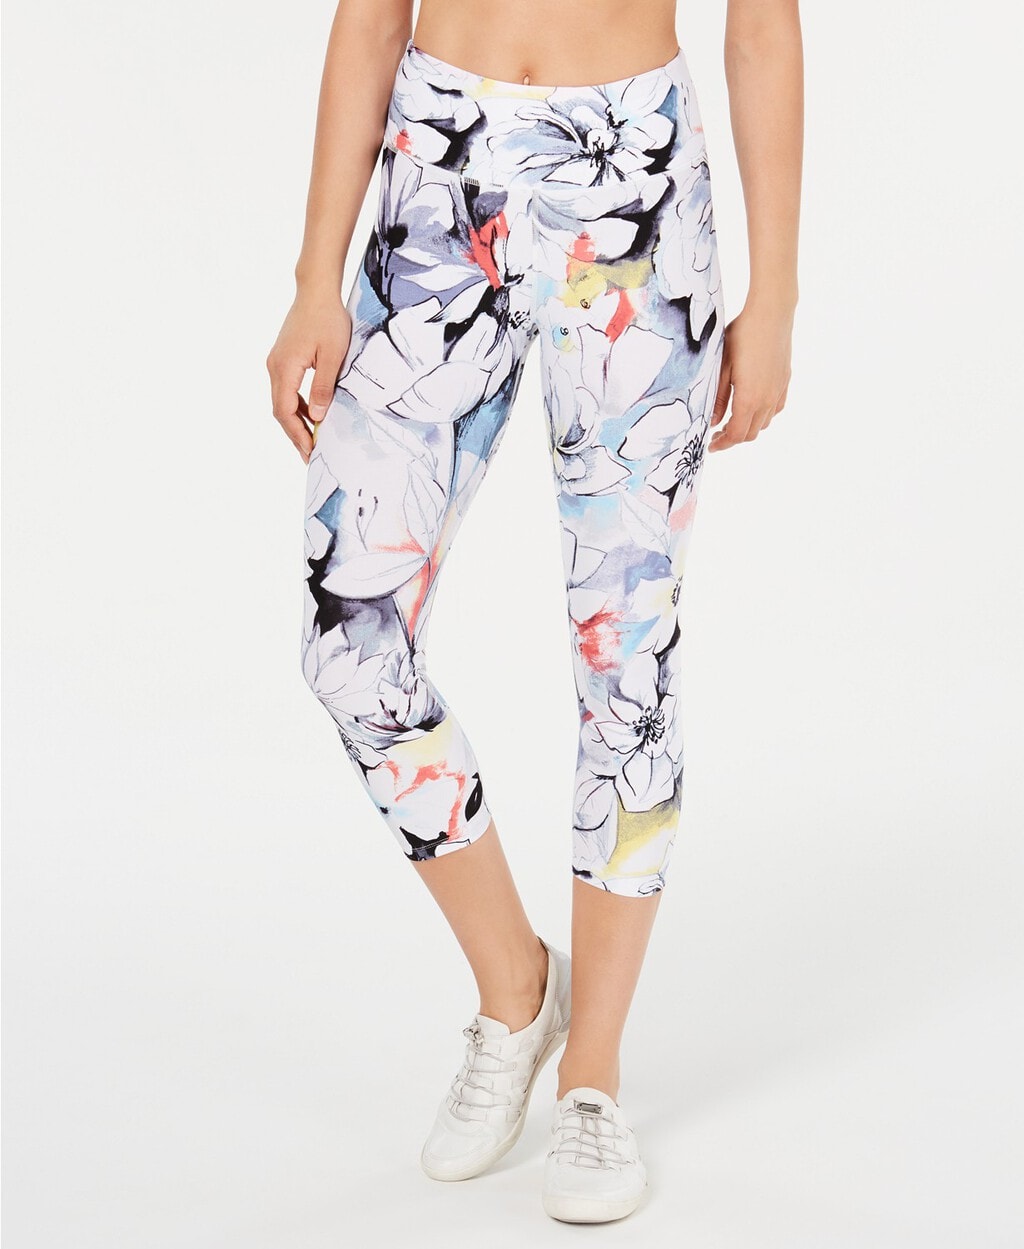 How to Style Printed Leggings to Look Fashion-Forward - College Fashion